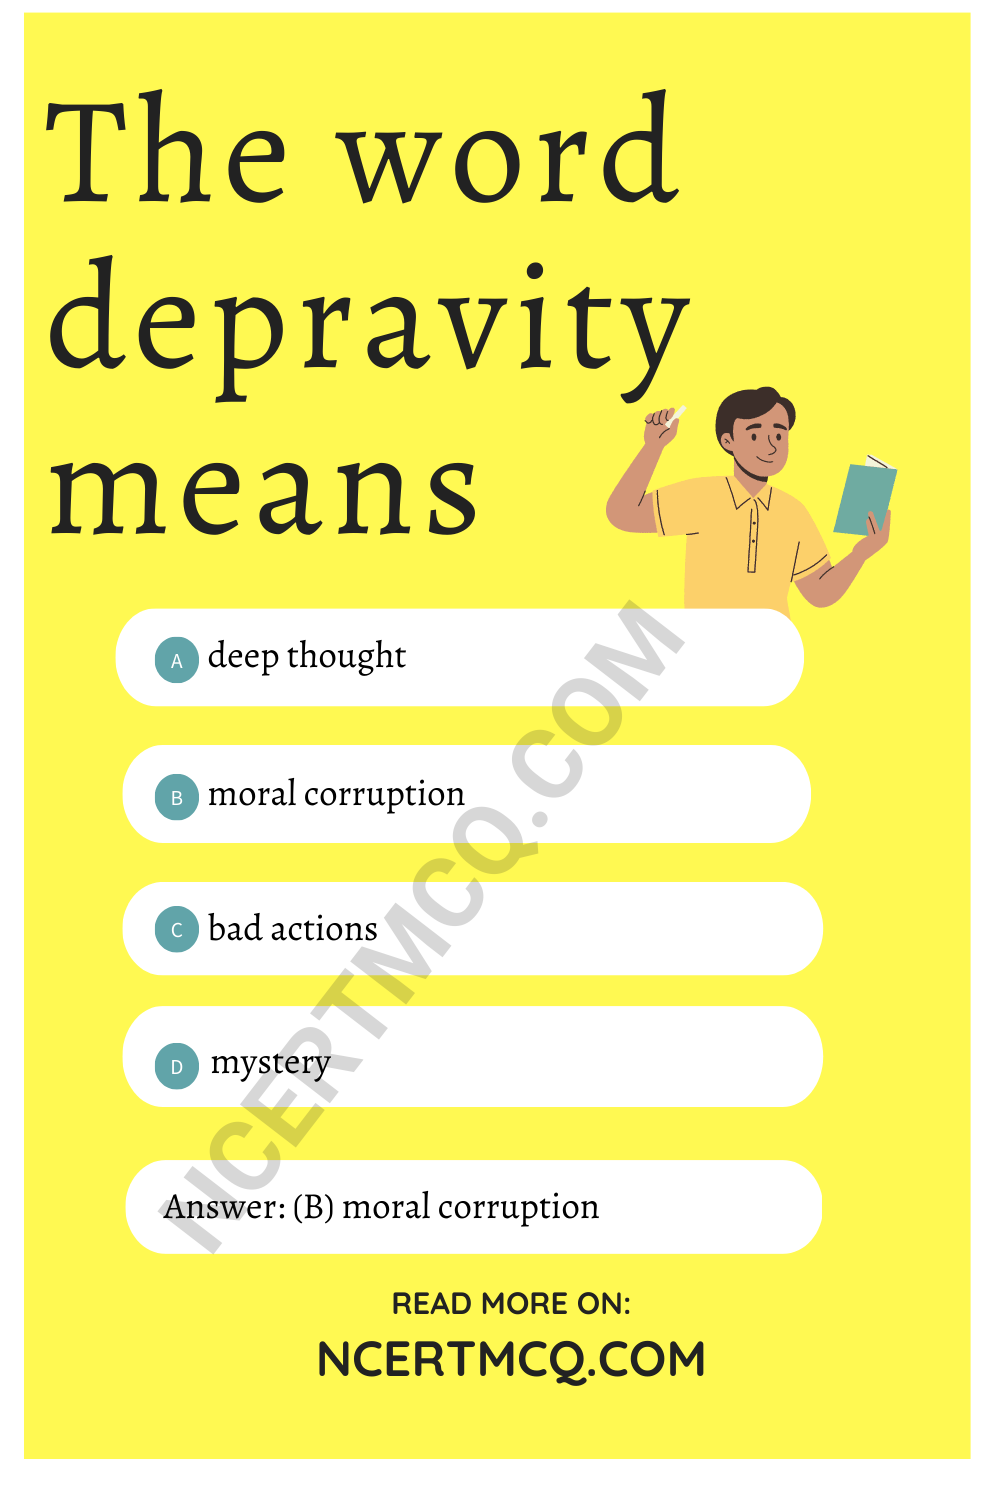 The word depravity means